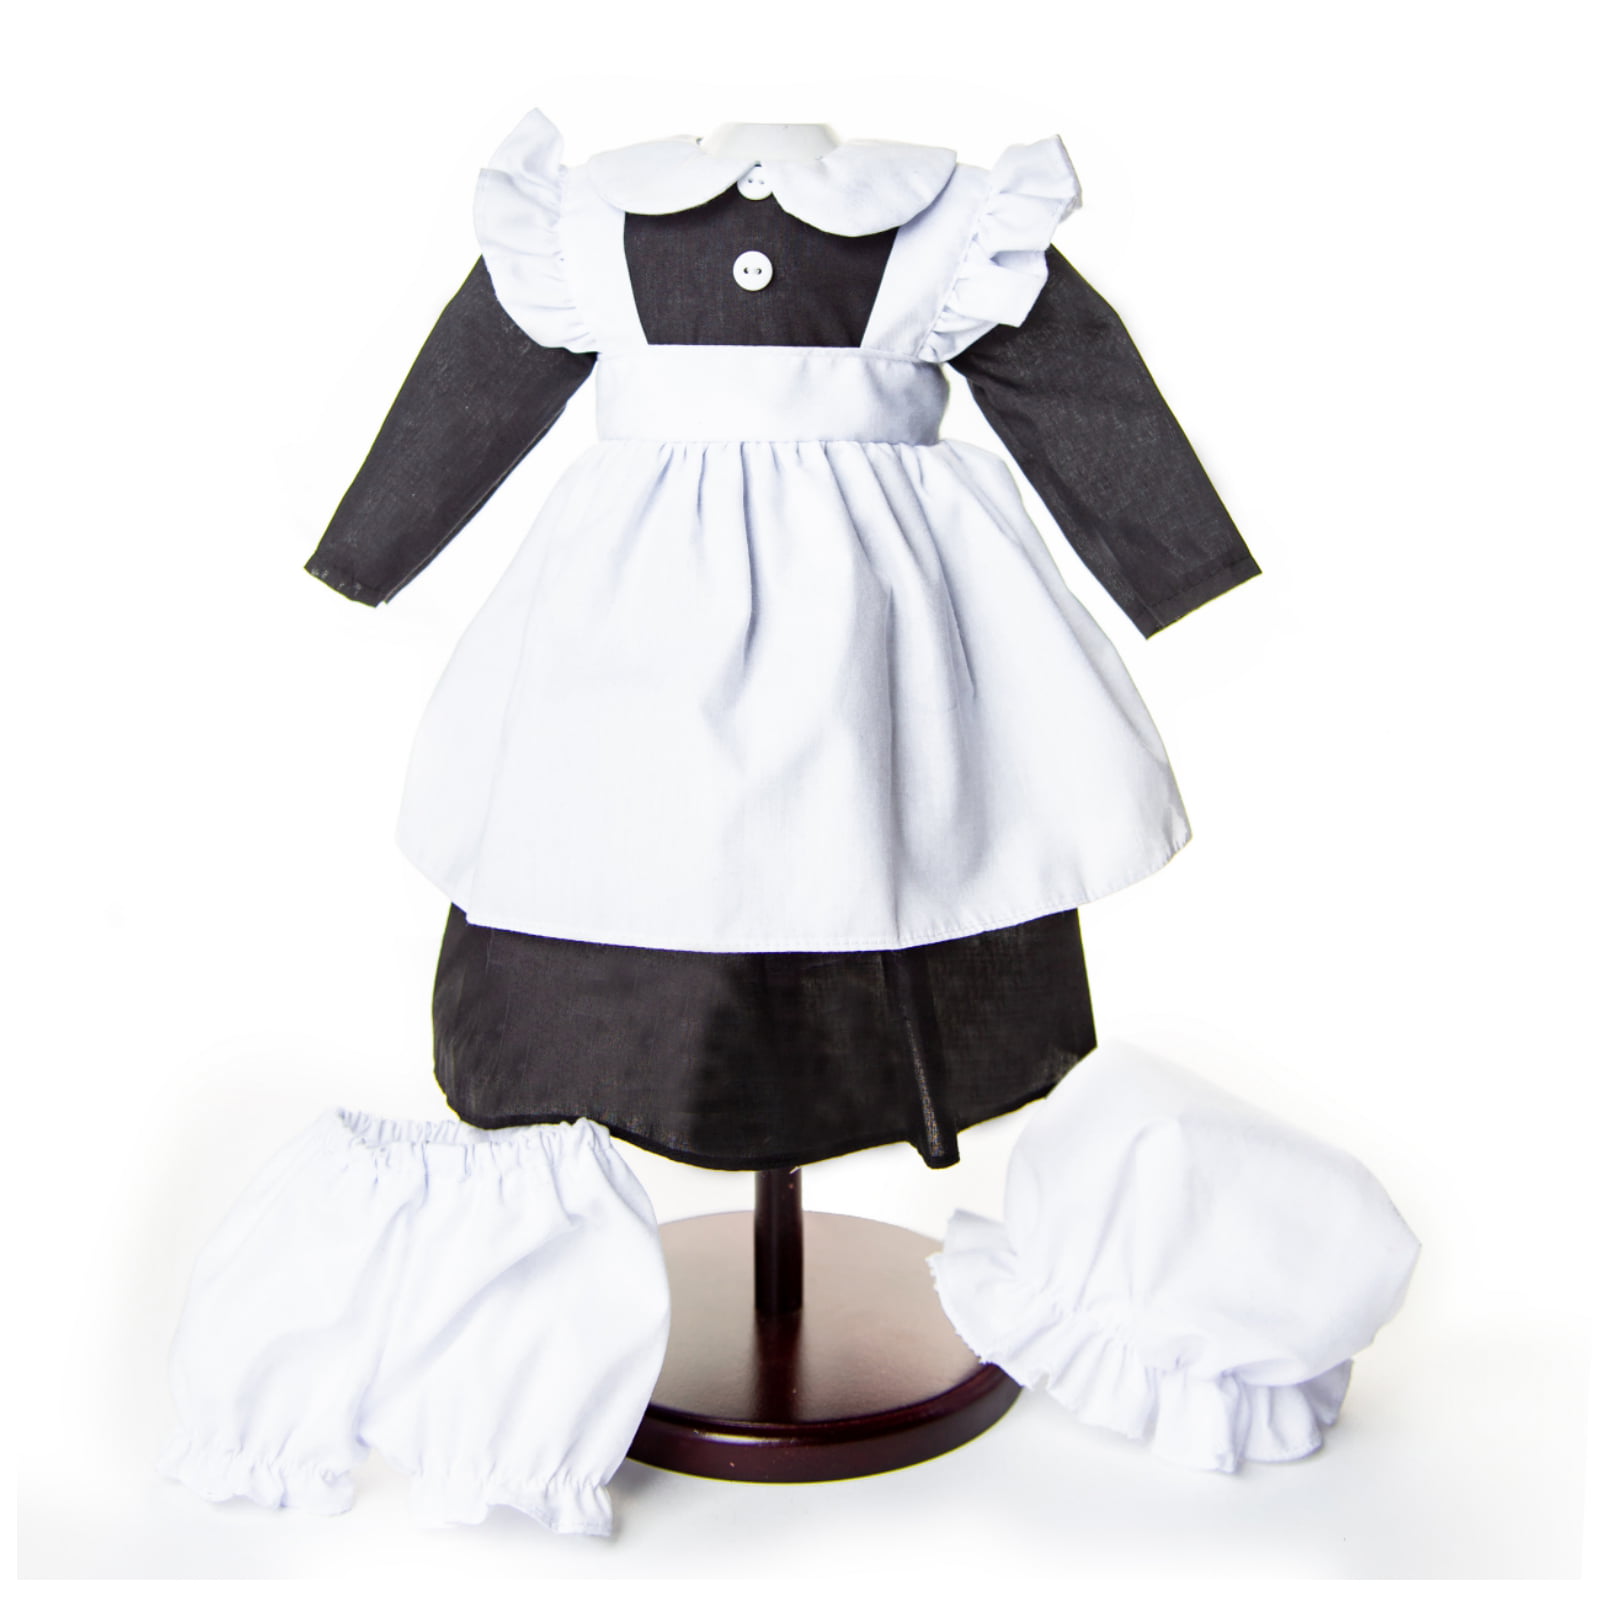 The Queen's Treasures 18 in Doll Clothes and Accessories, 5 PC Kitchen Maid Uniform with Dress, Cap, Apron, Pantaloons. Includes Boots. Fits